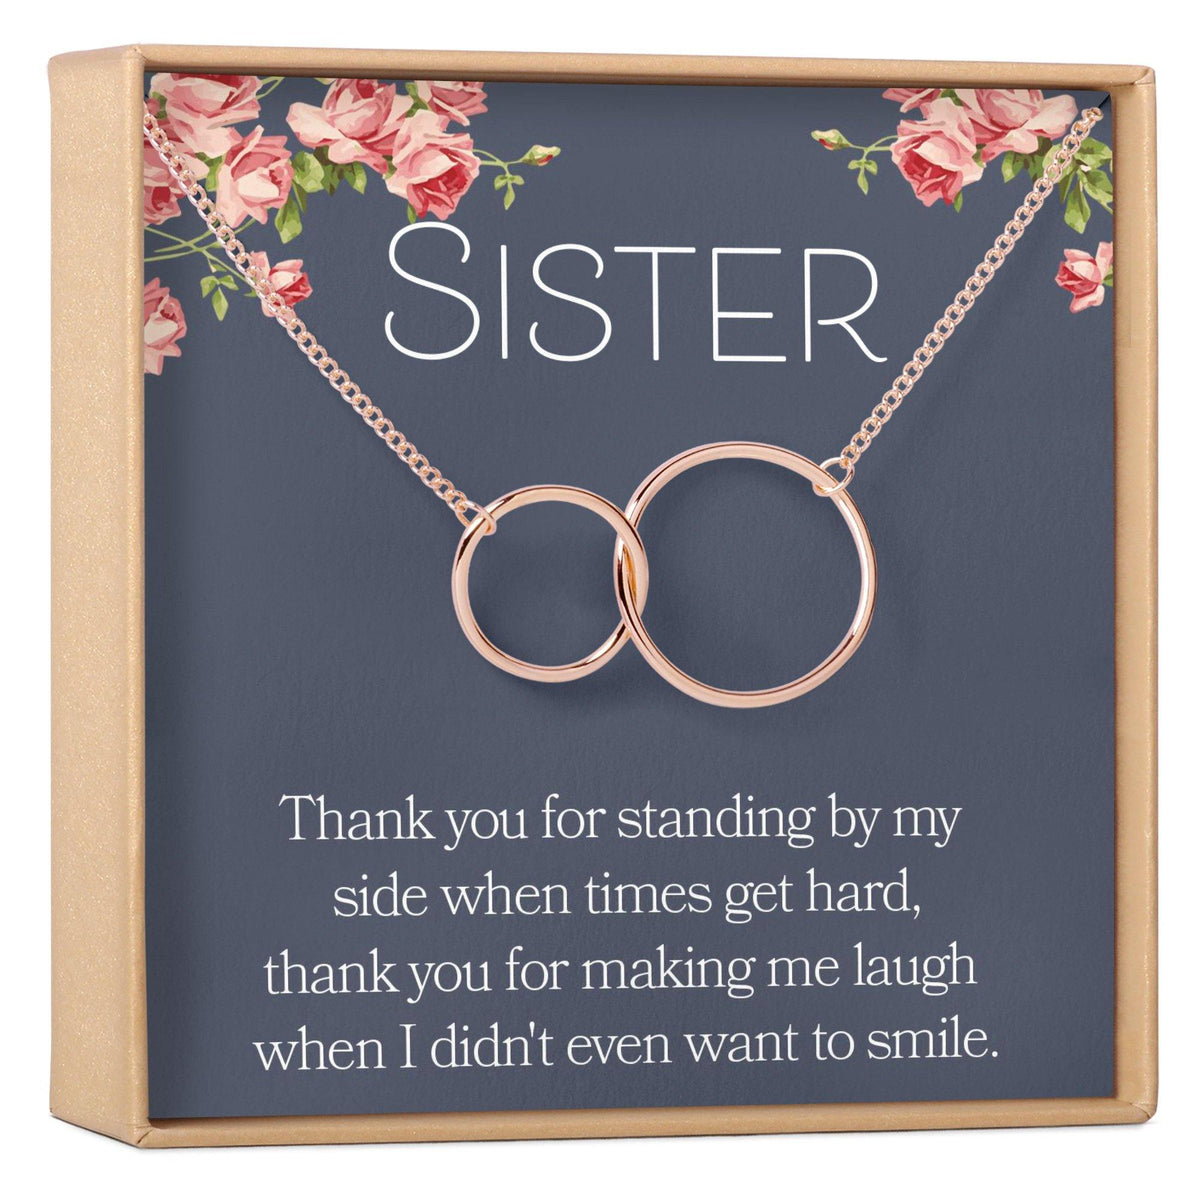 Sisters Necklace - Dear Ava, Jewelry / Necklaces / Pendants